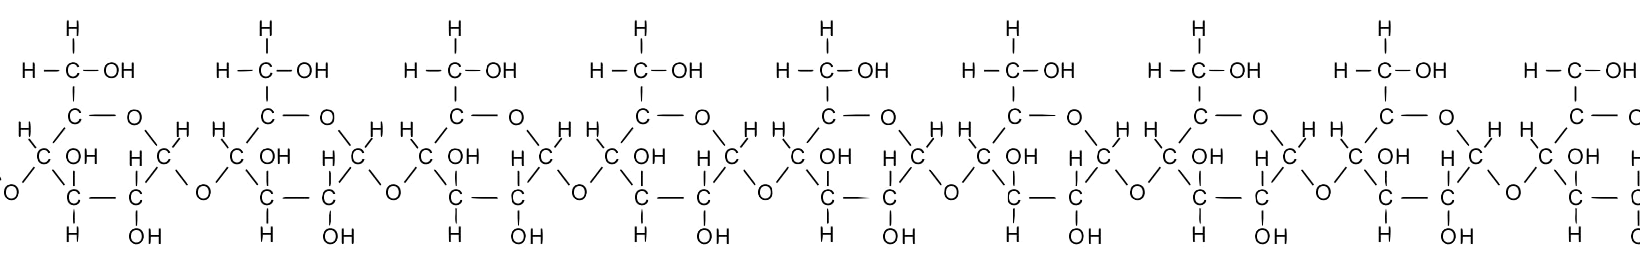 Described under header 1. Biological molecules are polymers that are built by combining monomers